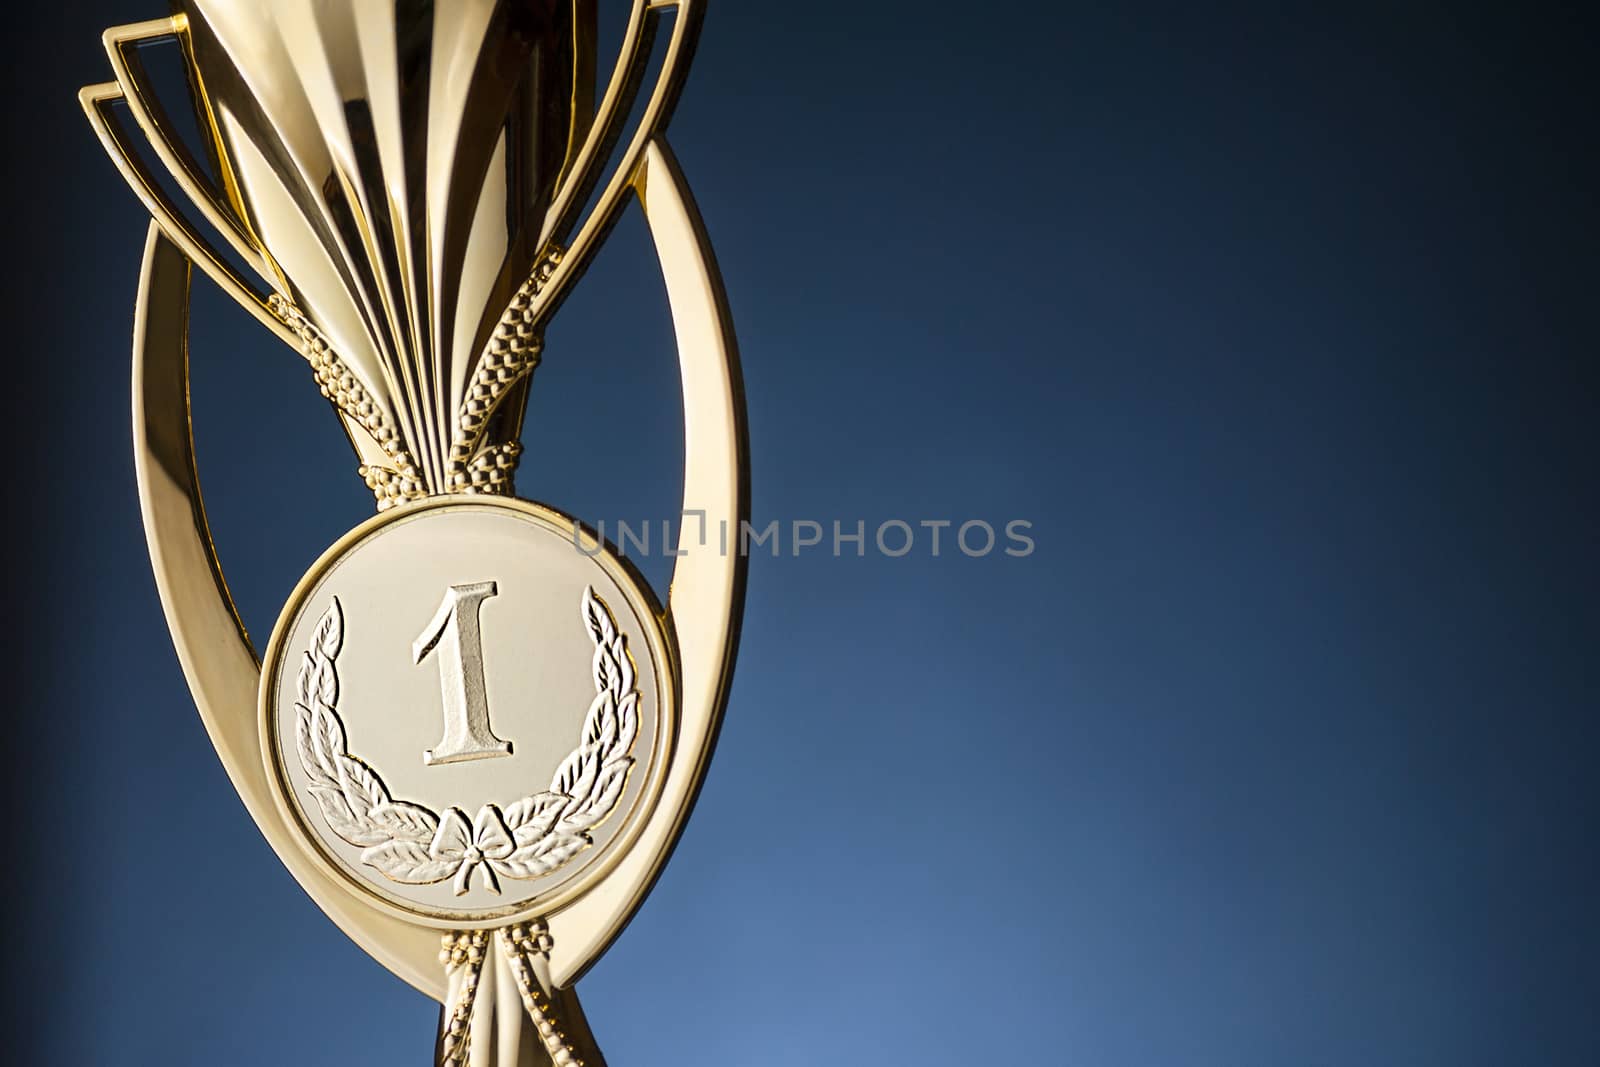 Gold championship winners trophy or cup placed to the side on a blue background with copy space